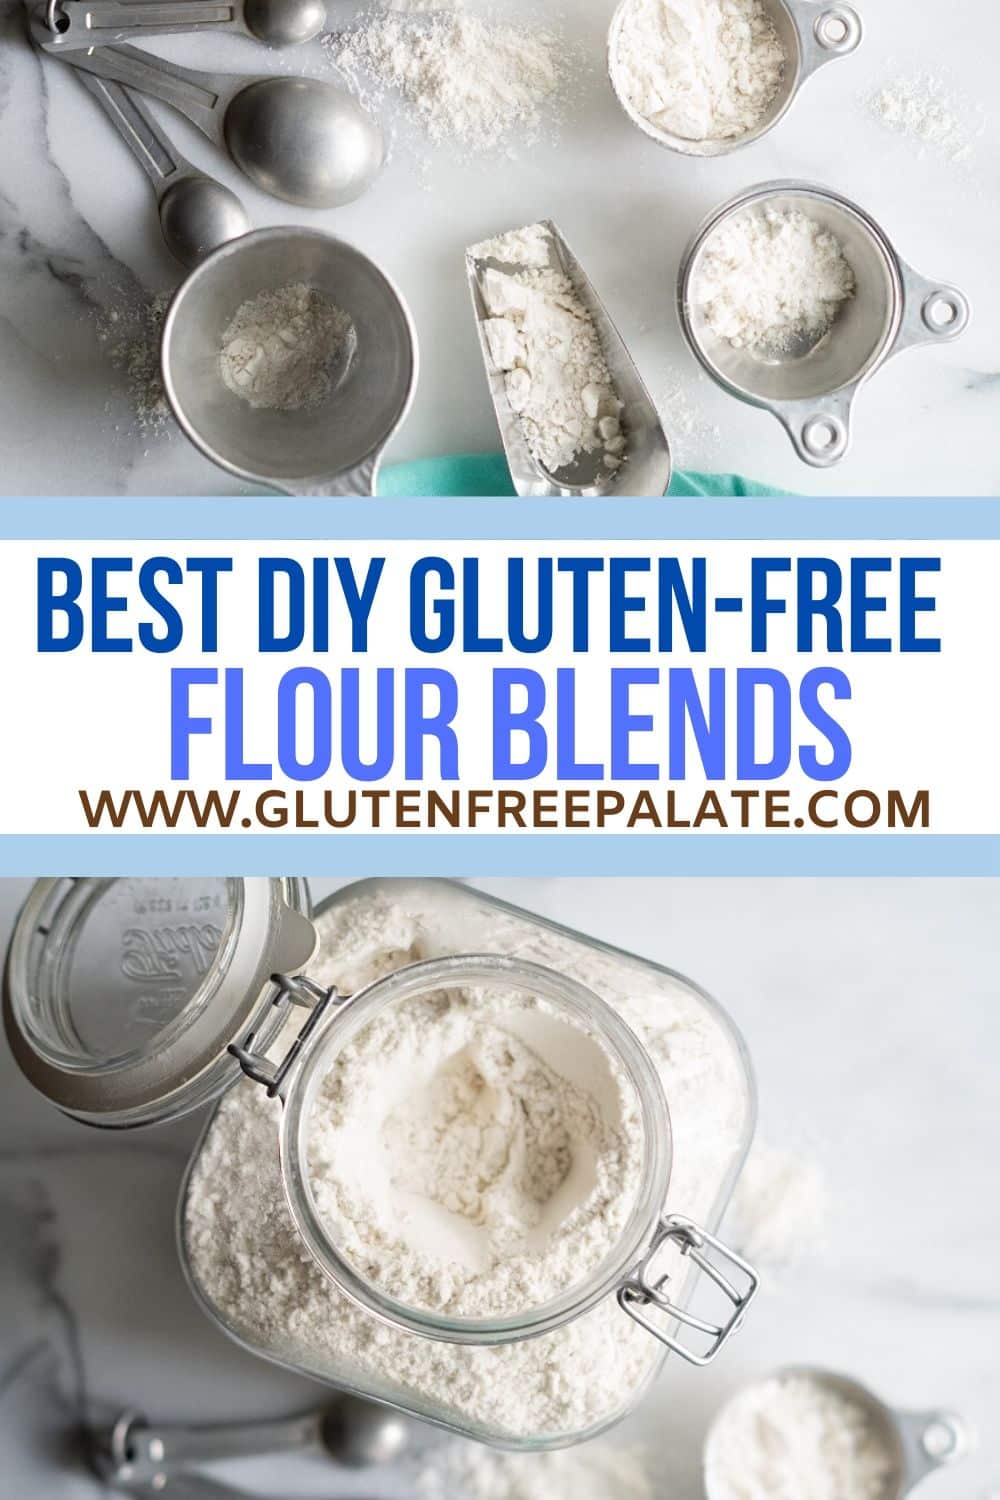 a pinterest pin collage of jars of gluten free flour with the words best diy gluten-free flour blends in text in the center